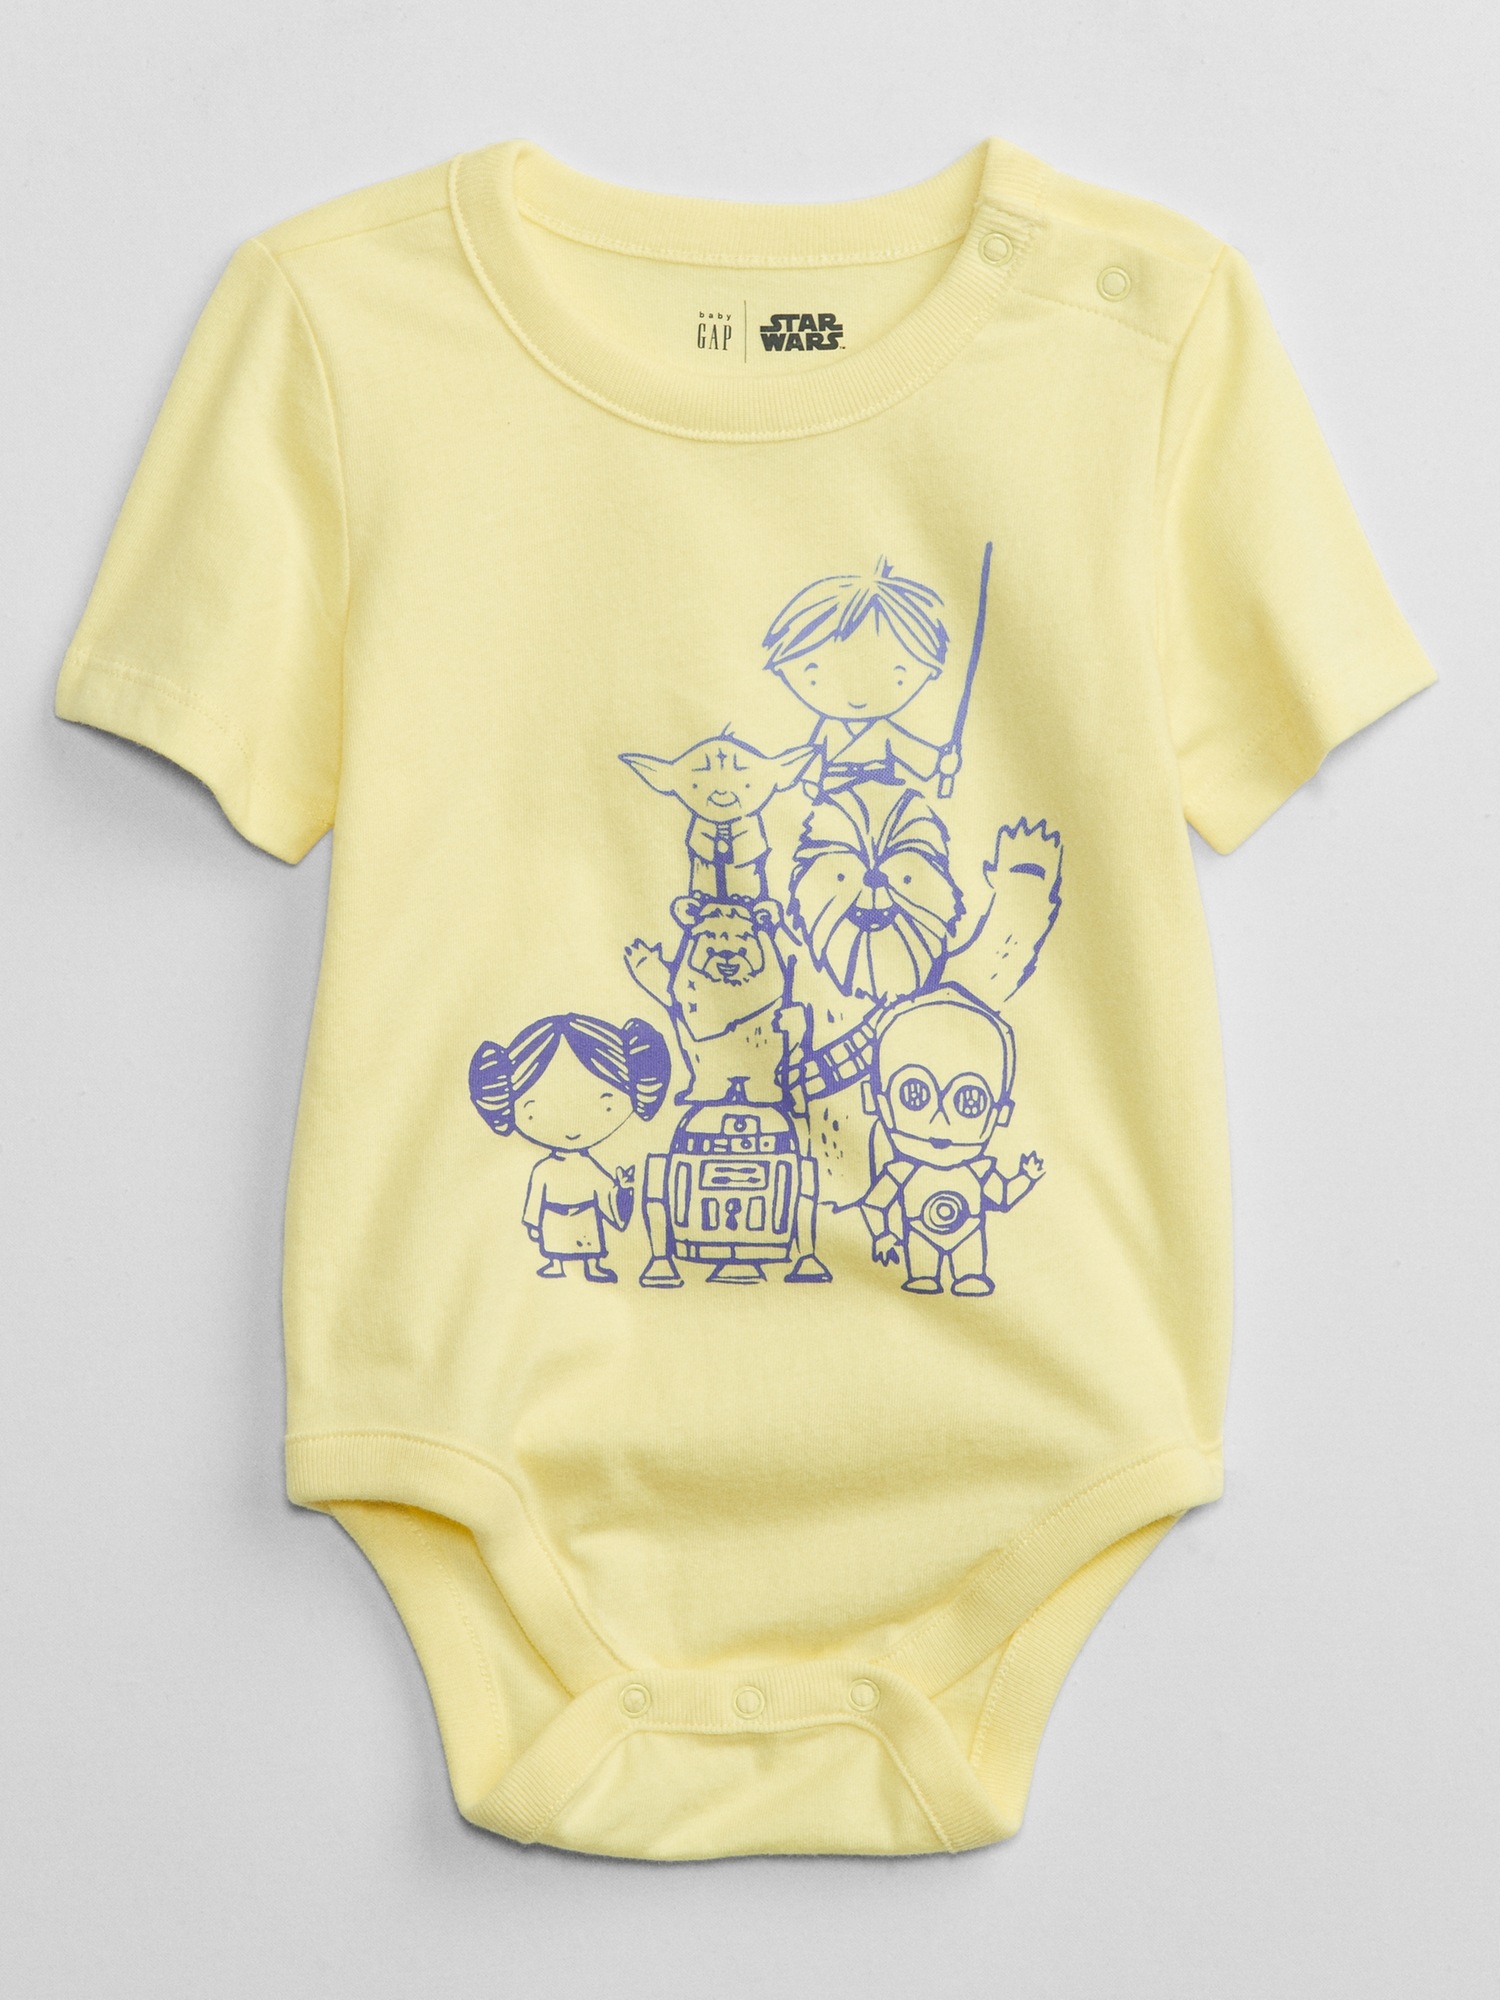 Greatest Son in the Galaxy Star Wars Inspired Baby Vest  Babygrow Baby 